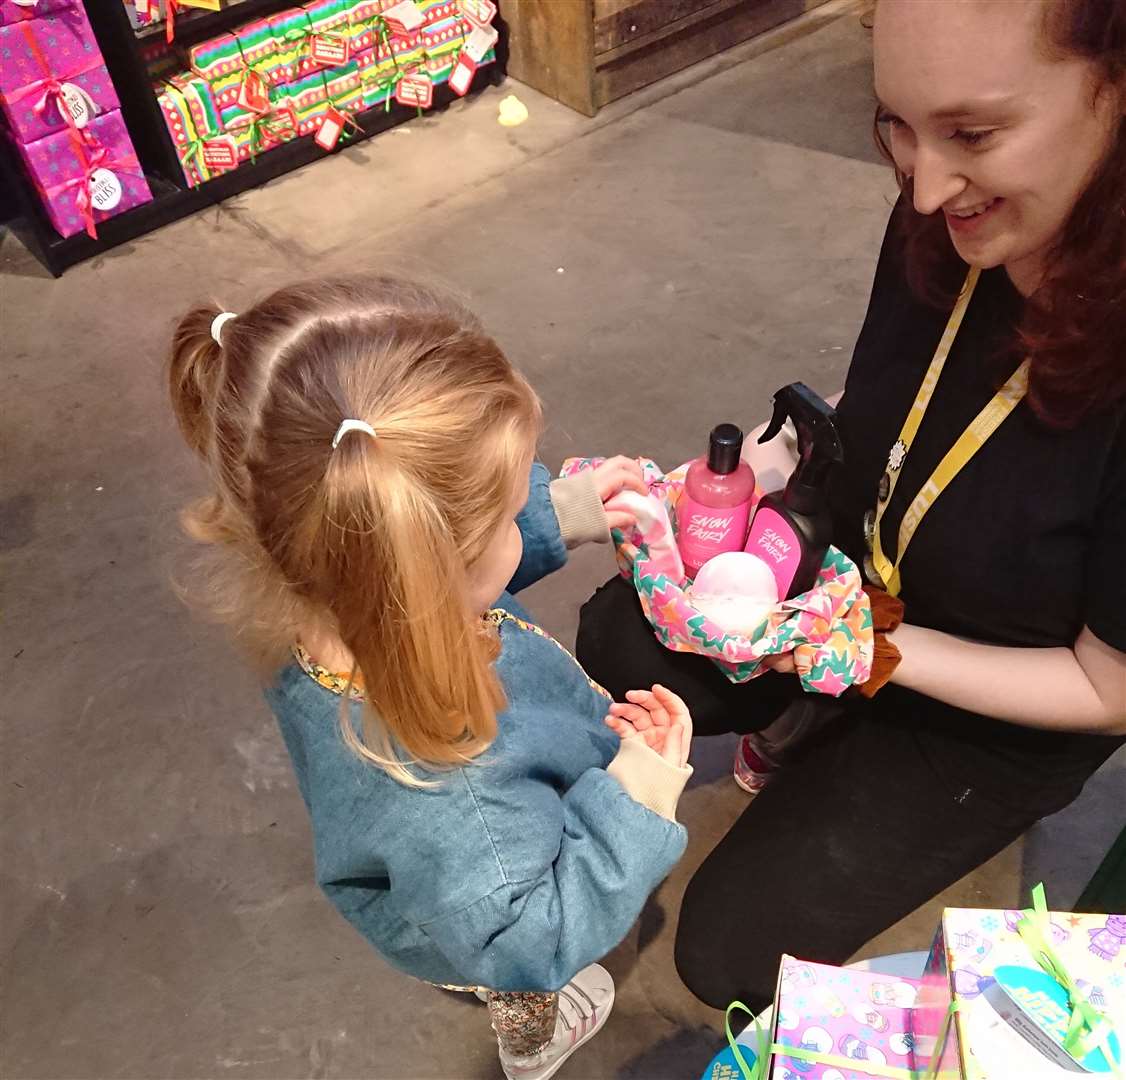 The very patient and understanding Sabrina helping us pick out some items in Lush